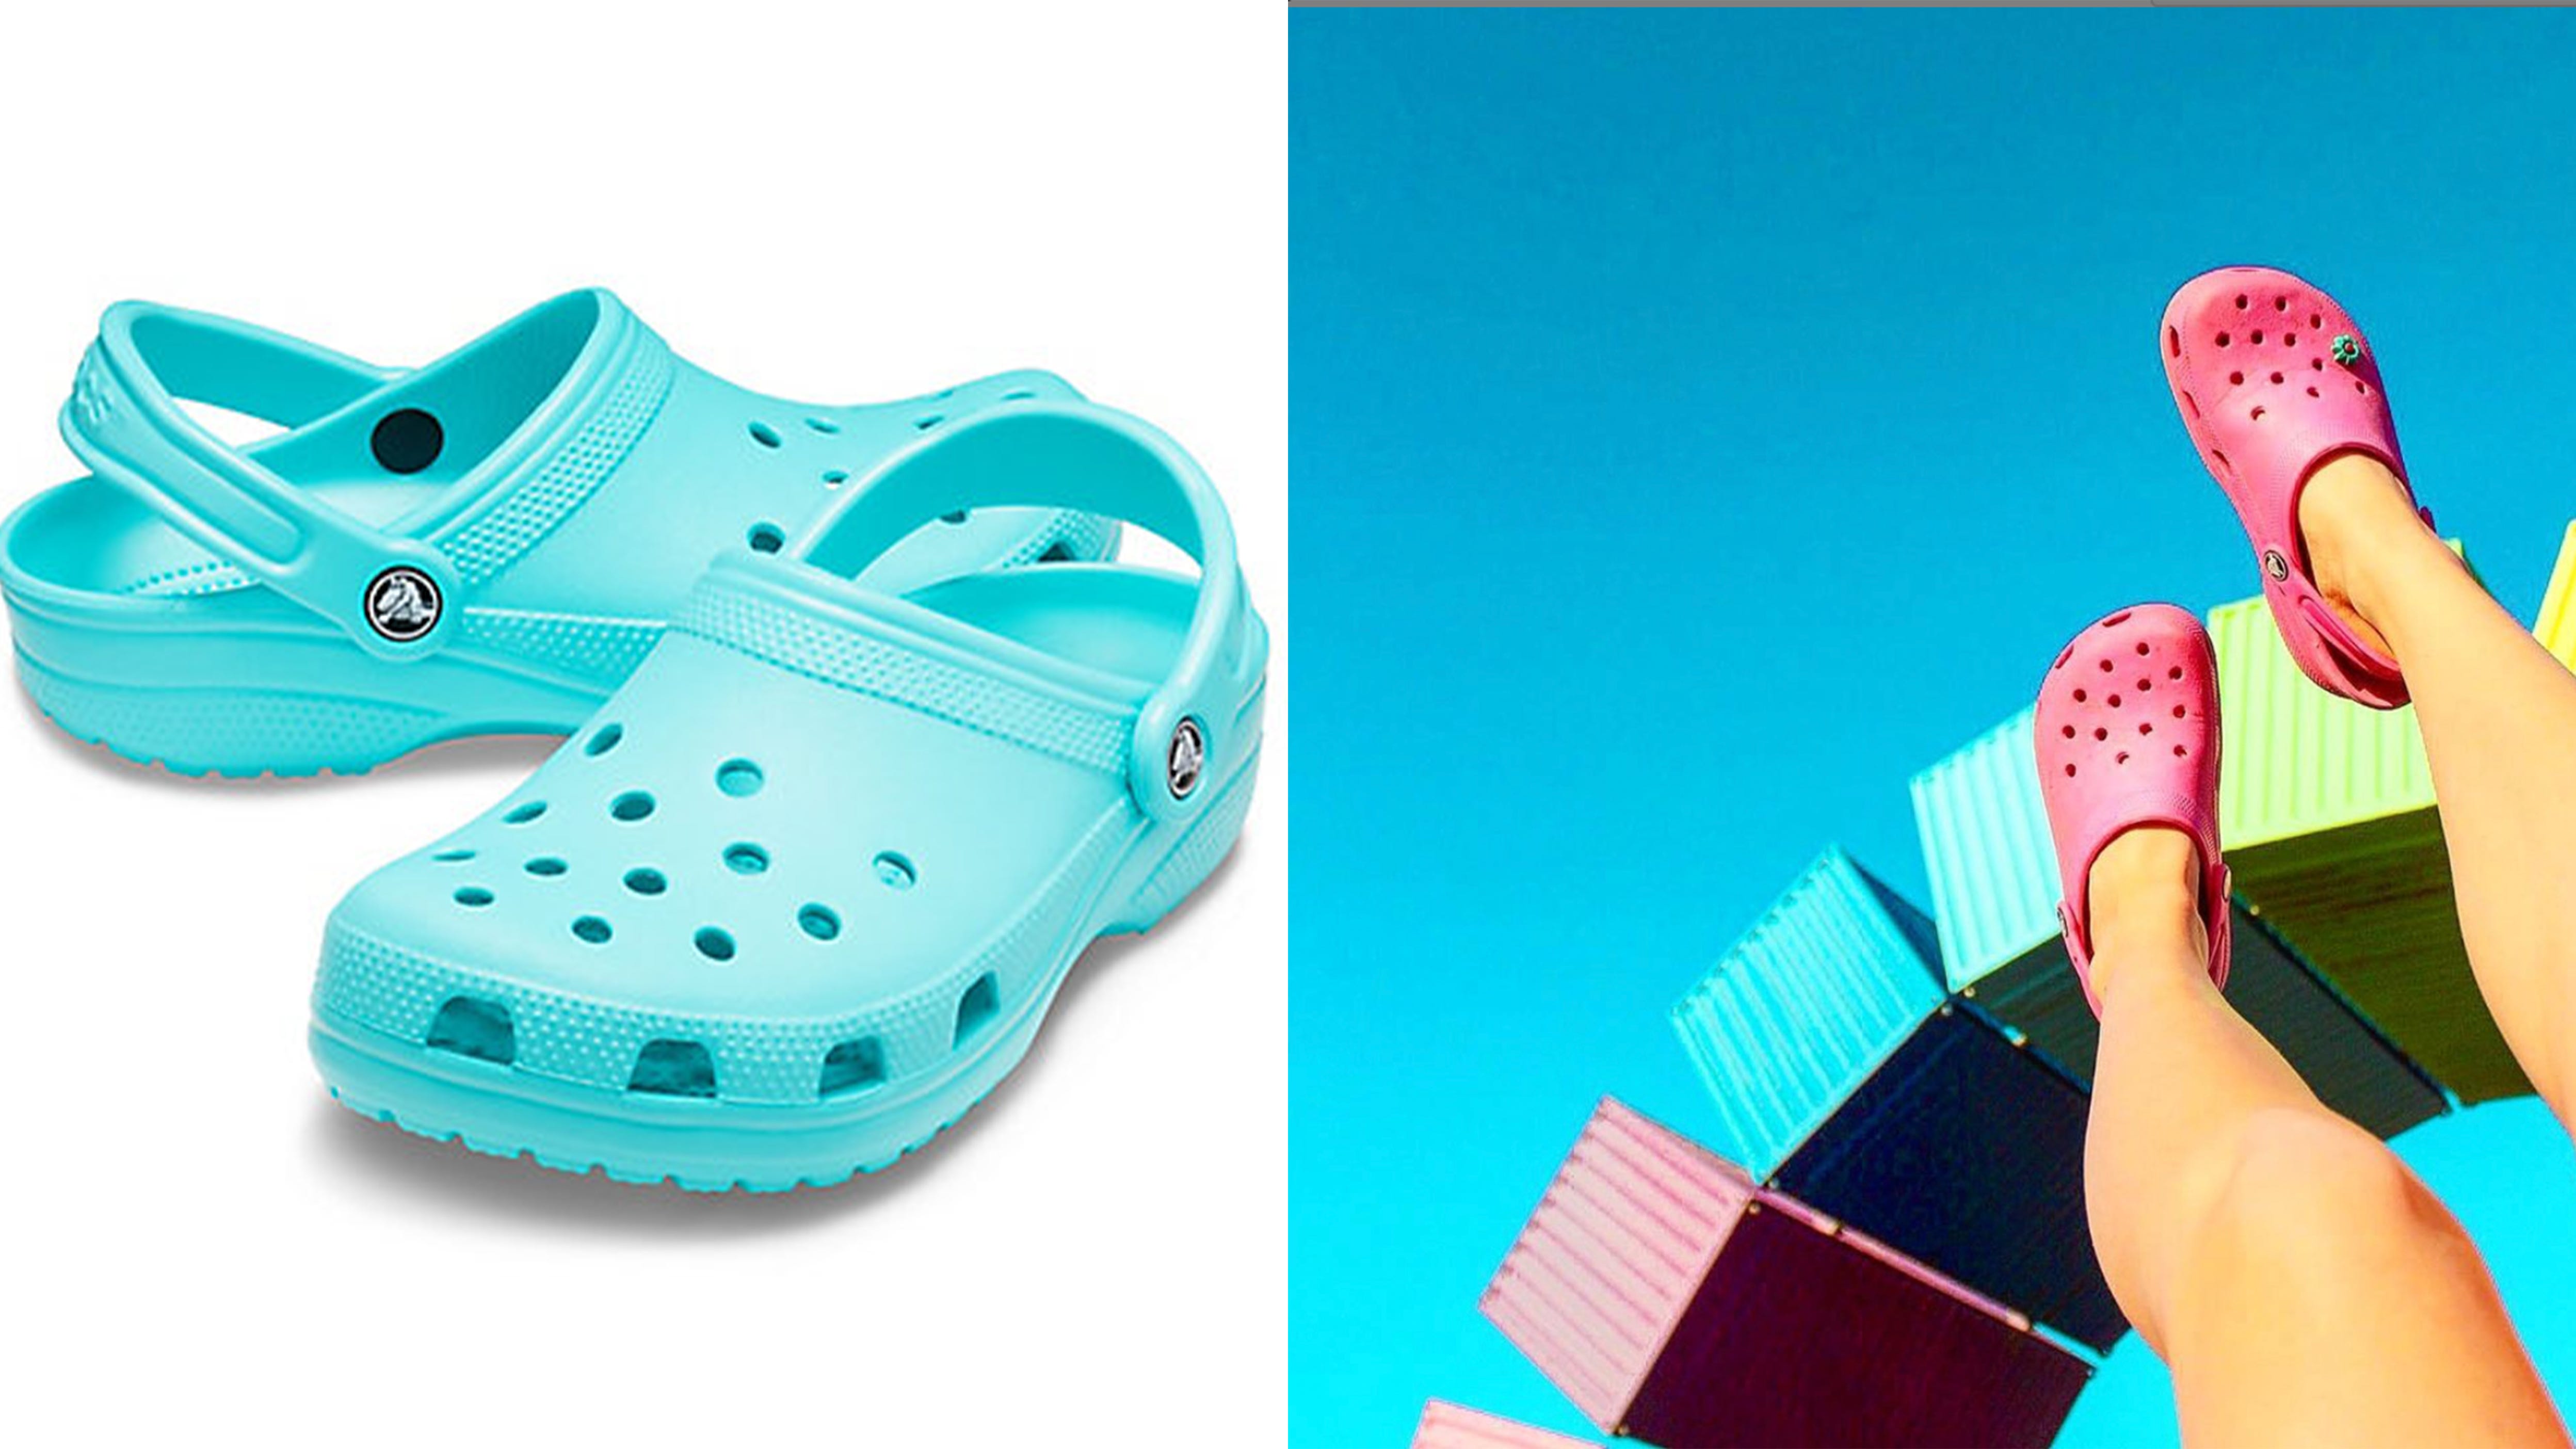 Crocs shoes: Get the brand's ultra 